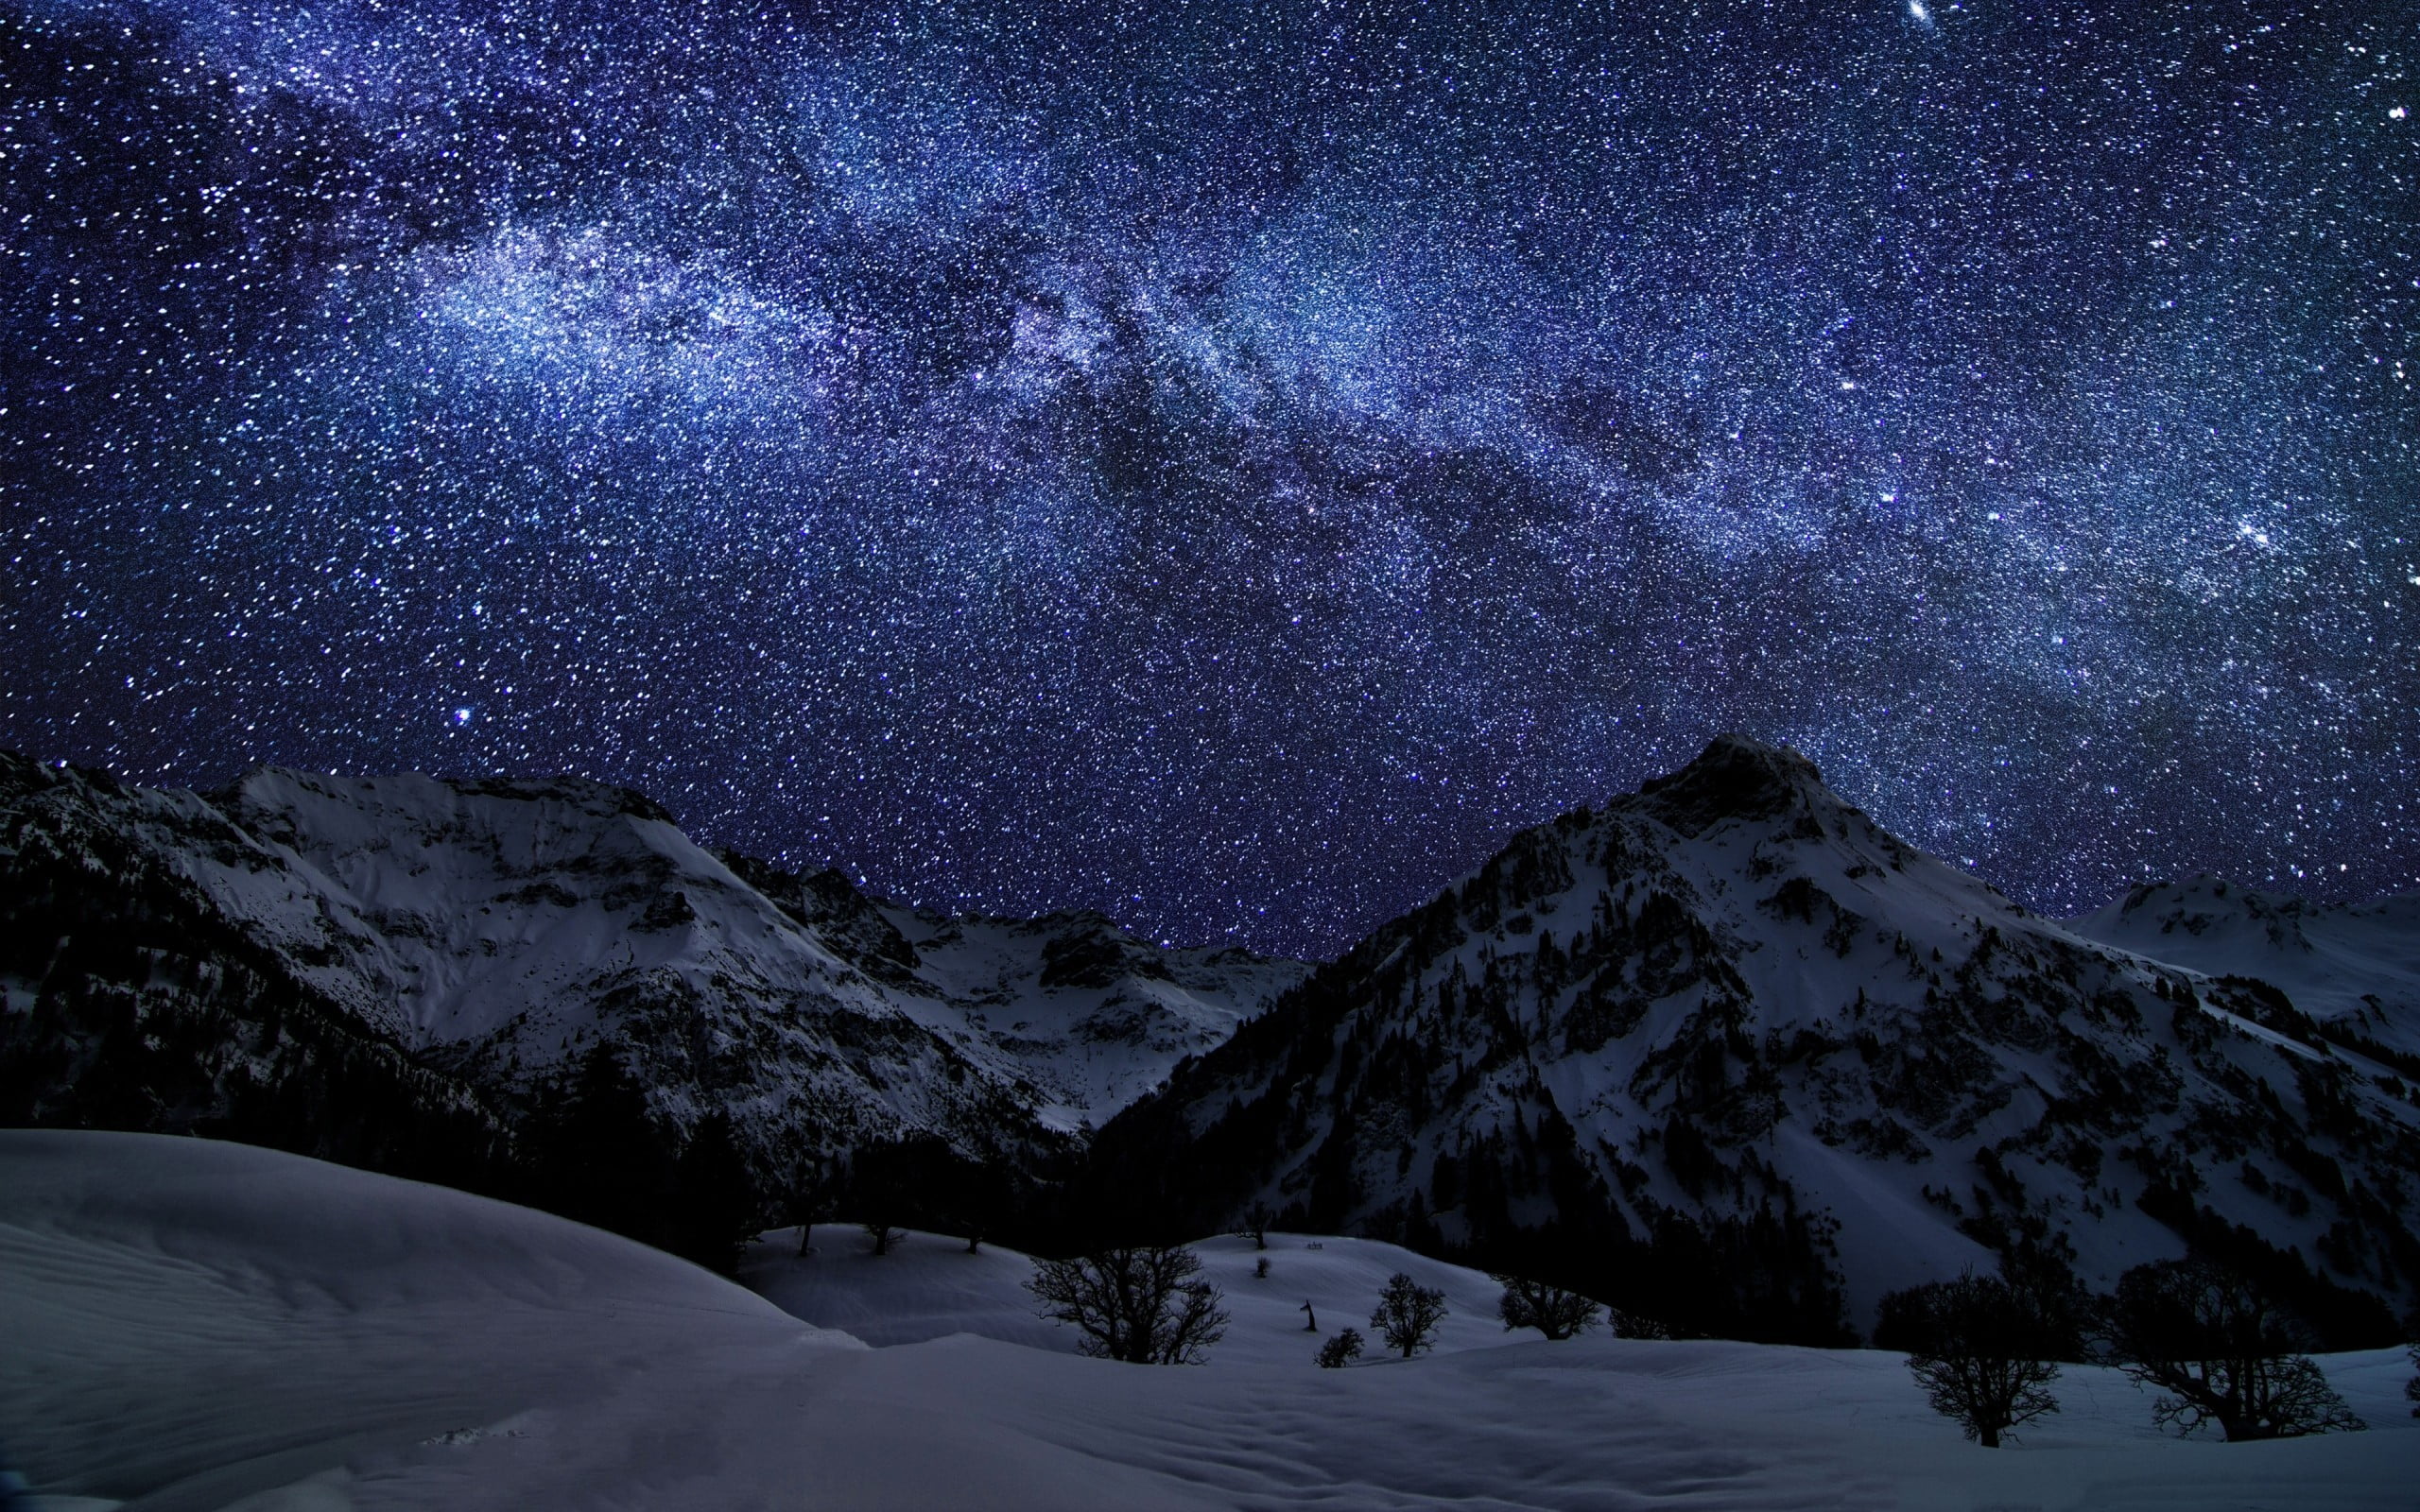 snow-covered mountains under starry sky, photography of mountain with snows